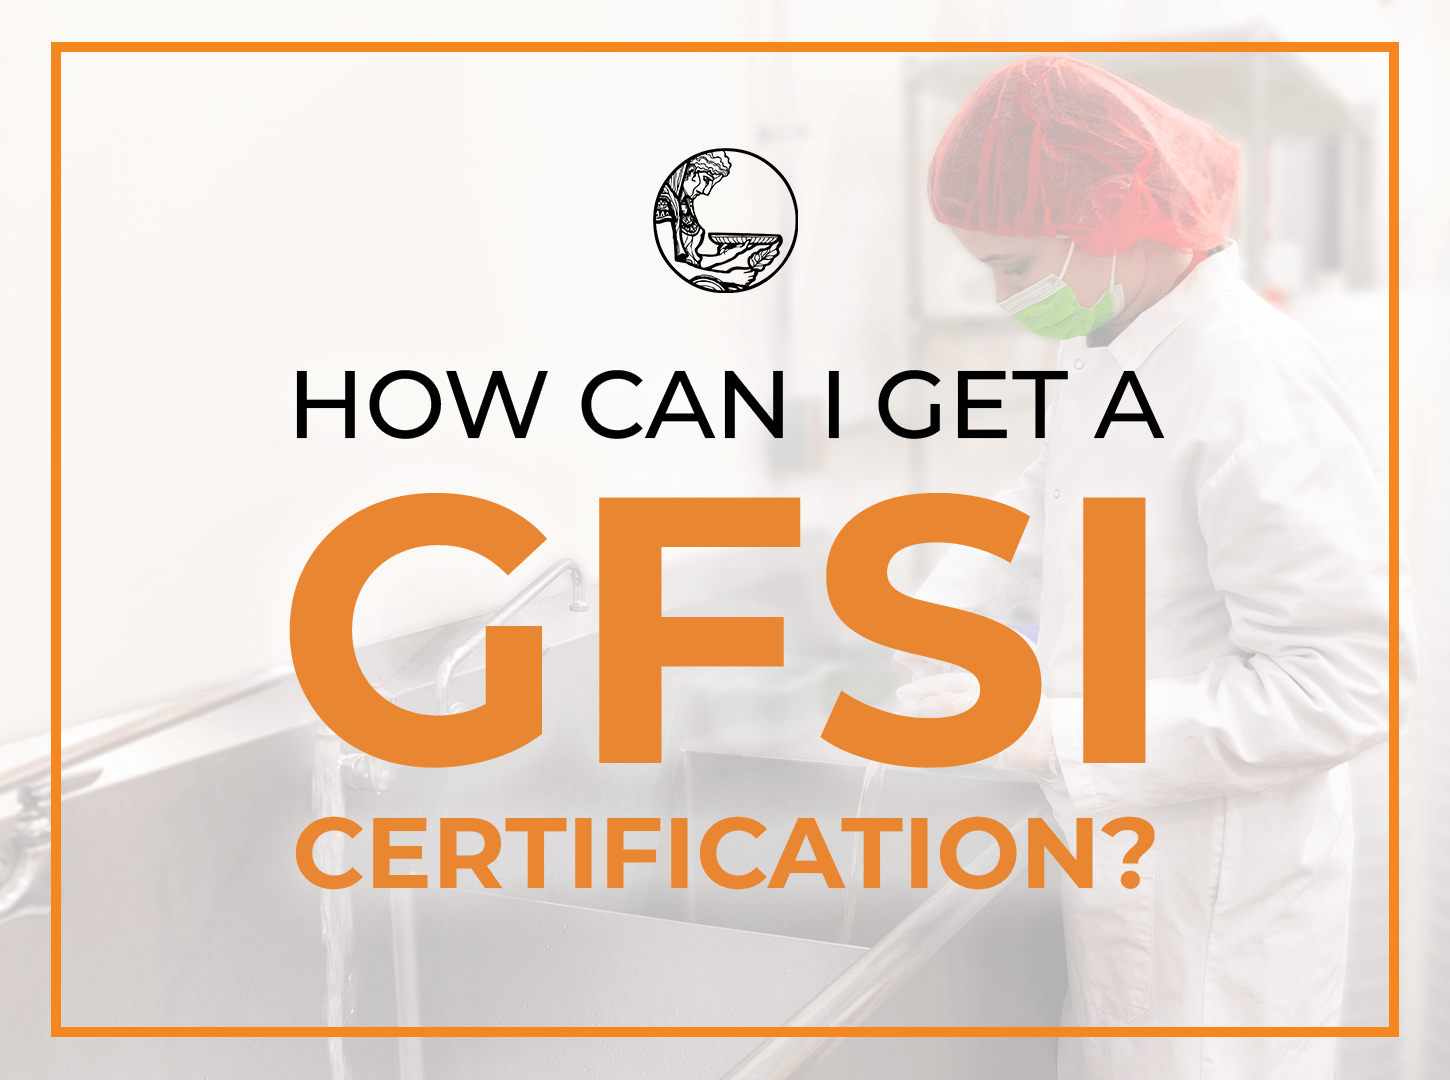 Featured image for “How can I get a GFSI certification?”